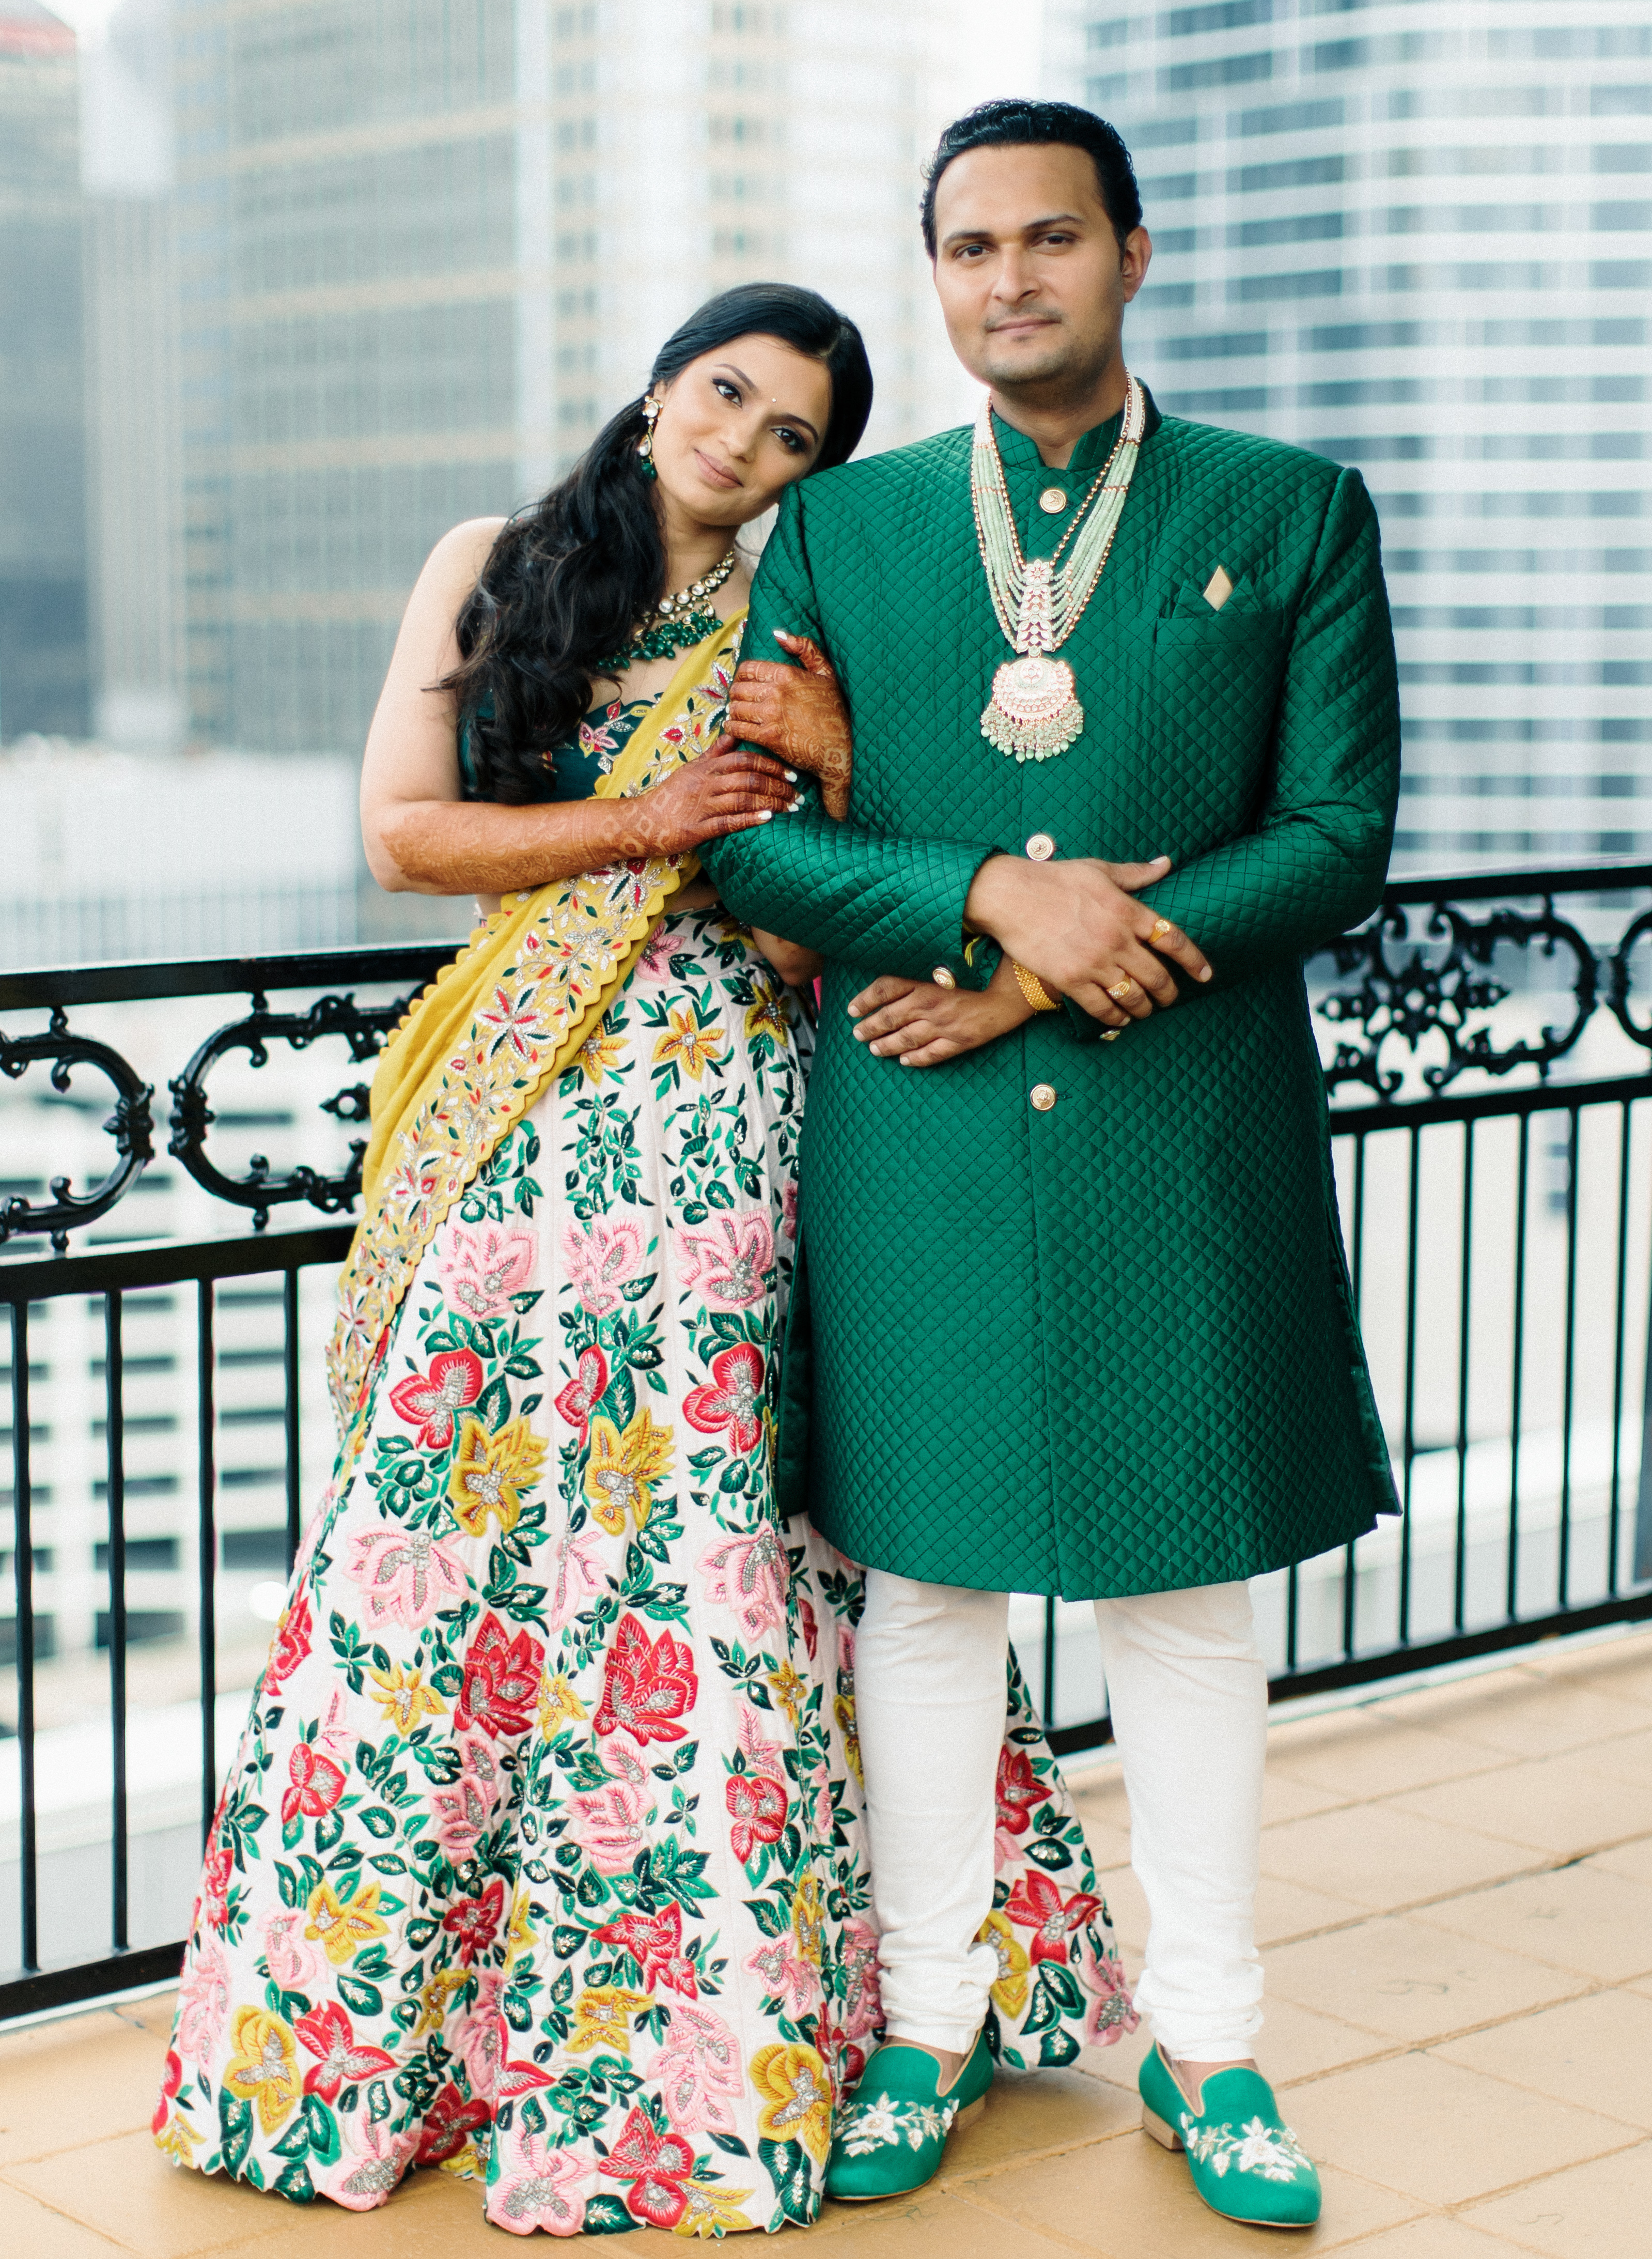 The bride and groom pose in traditional Hindu attire on the balcony of their wedding venue.